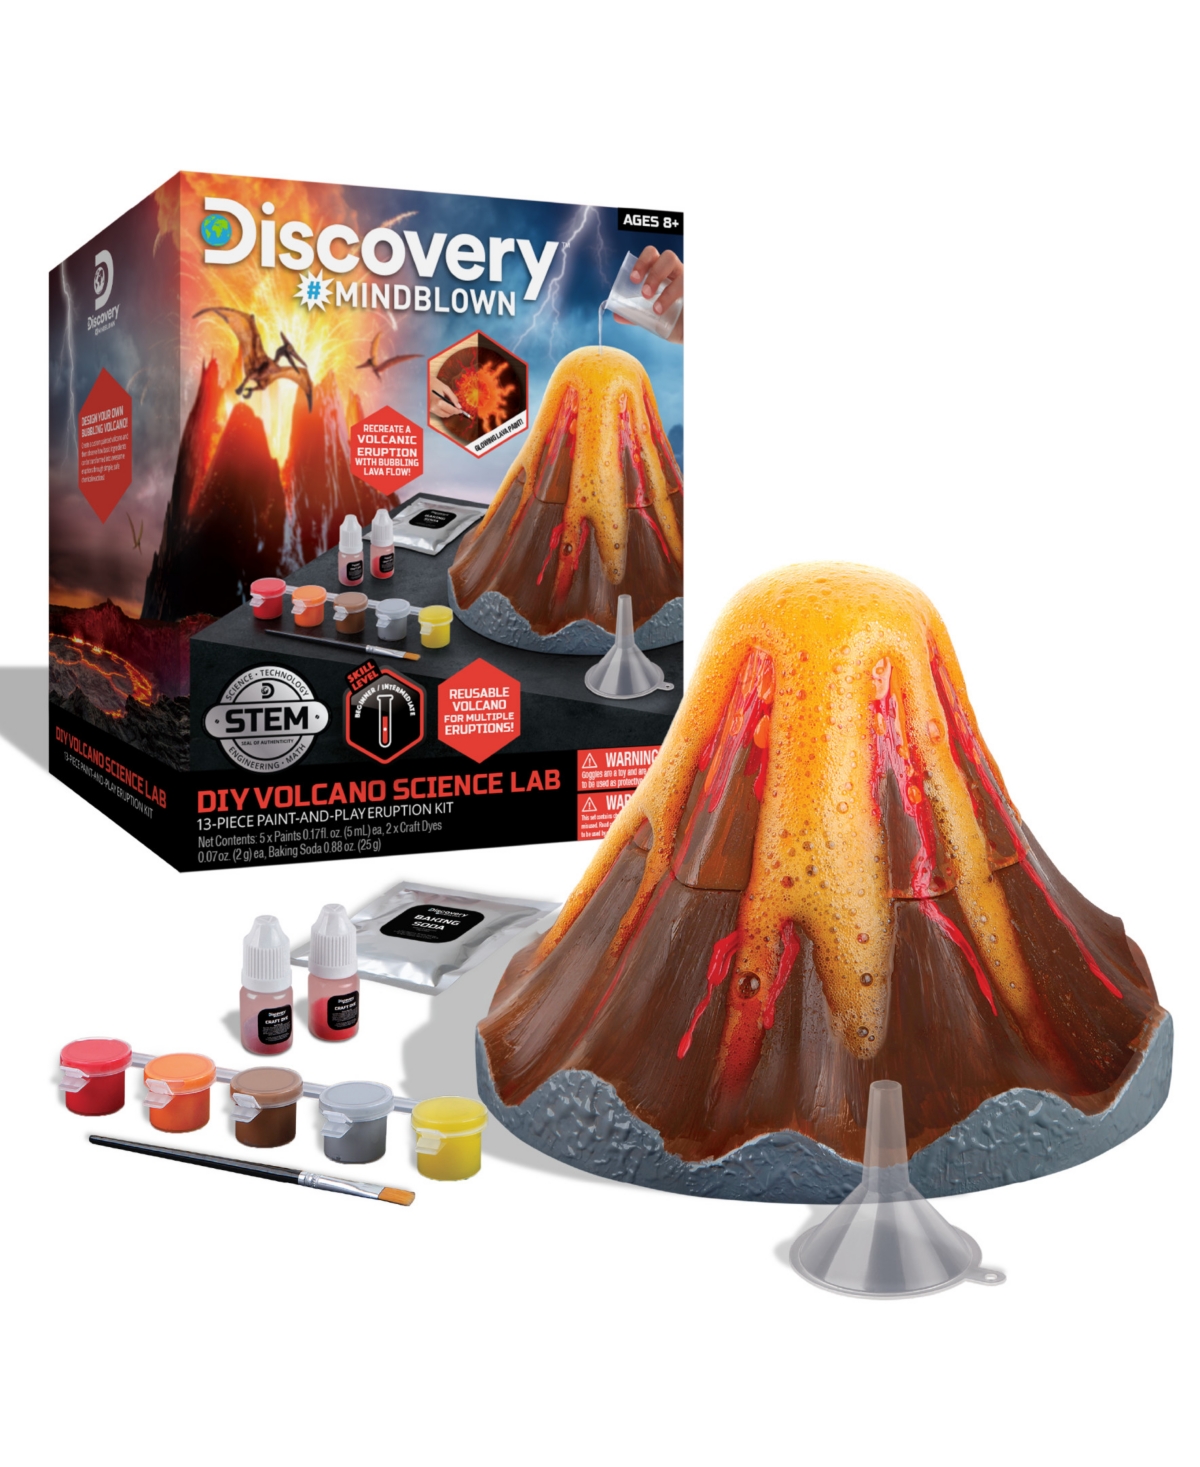 Discovery Mindblown Do-it-yourself Volcano Science Lab, 12 Piece Paint And Play Eruption Kit In Orange